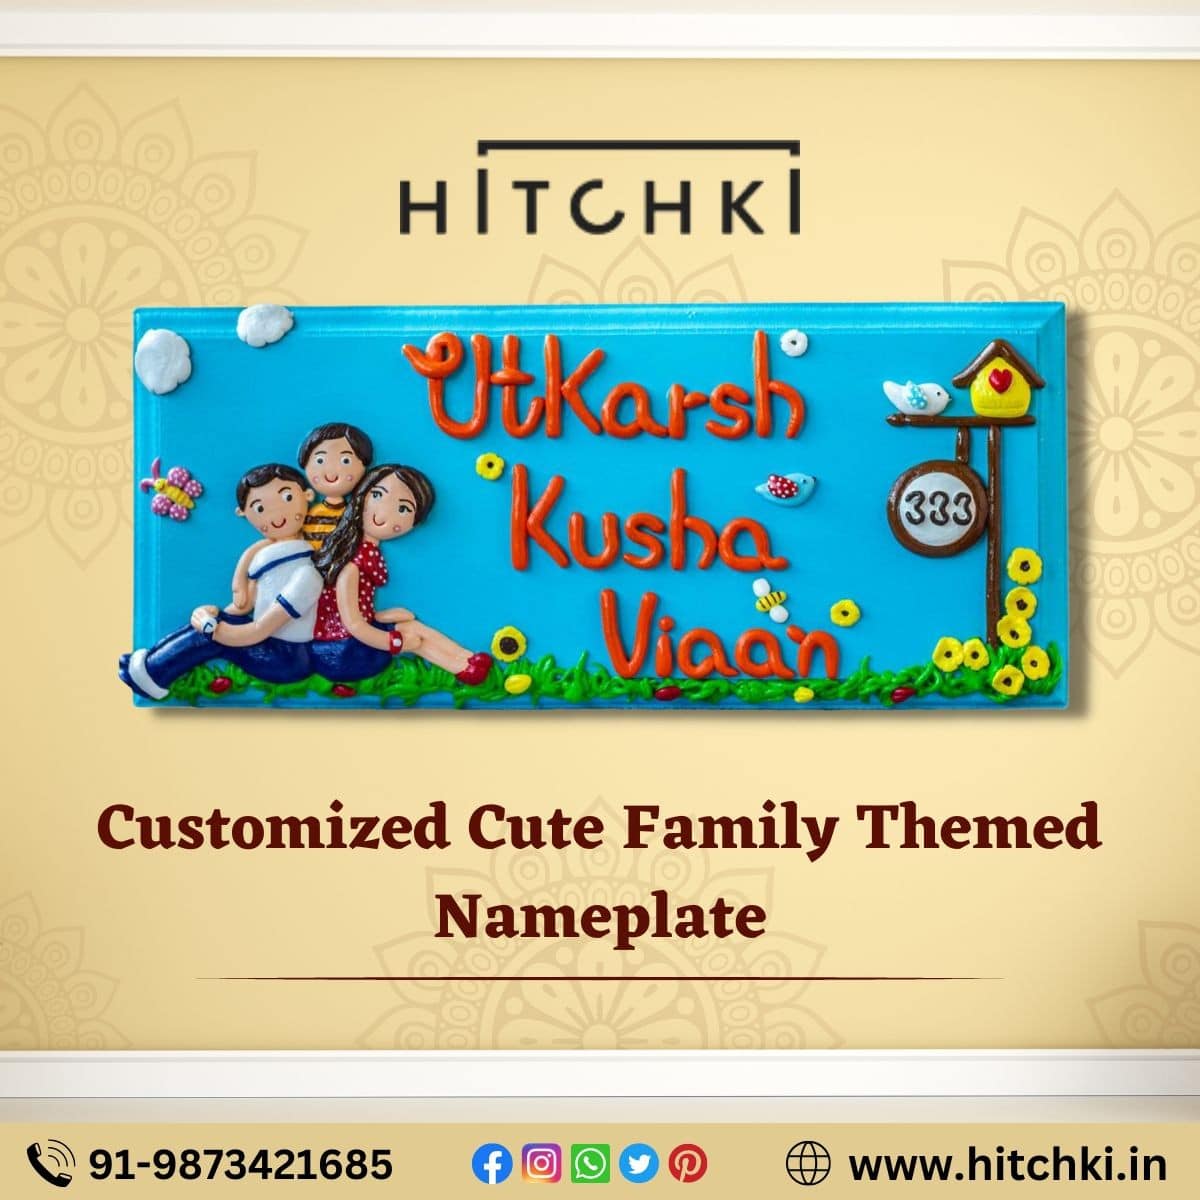 Buy A Customized Cute Family Themed Nameplate